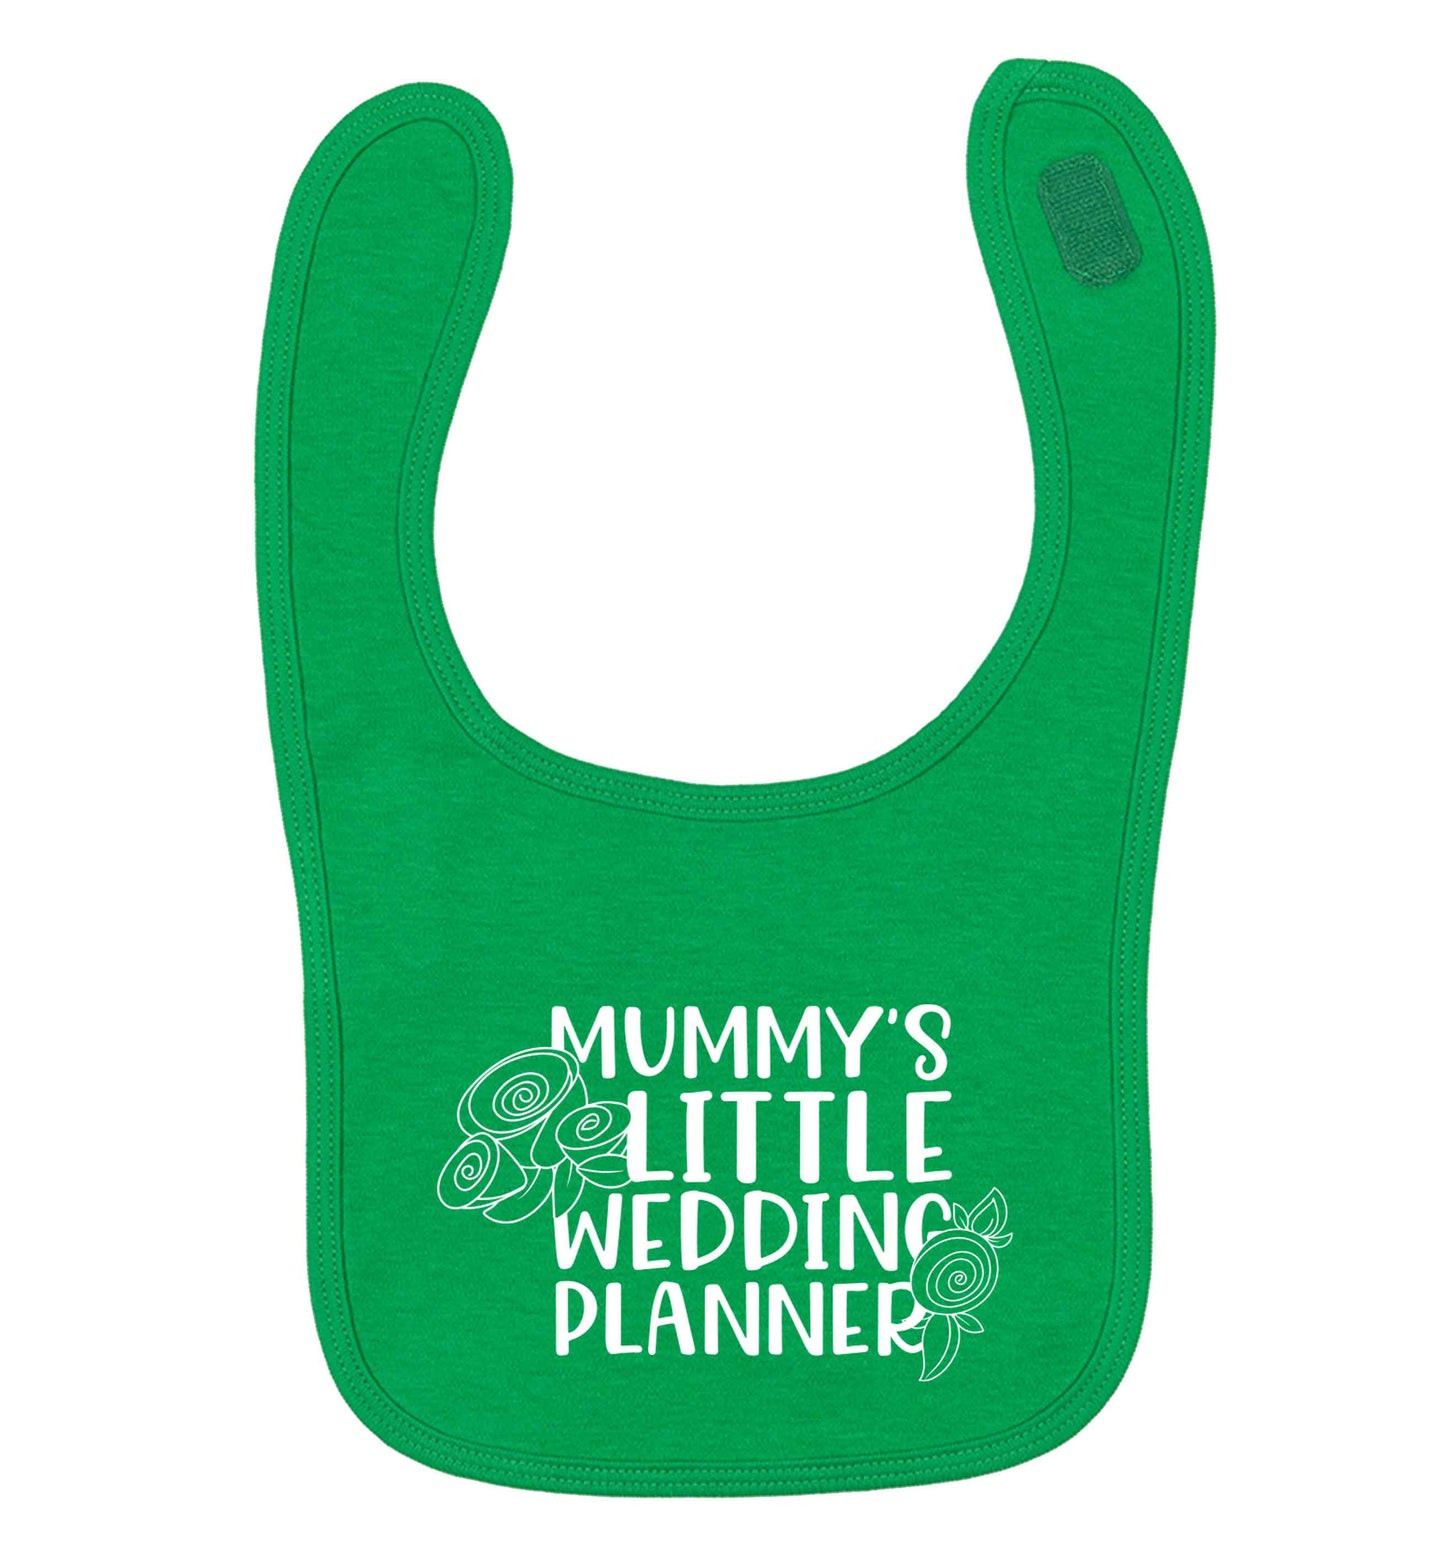 adorable wedding themed gifts for your mini wedding planner! green baby bib